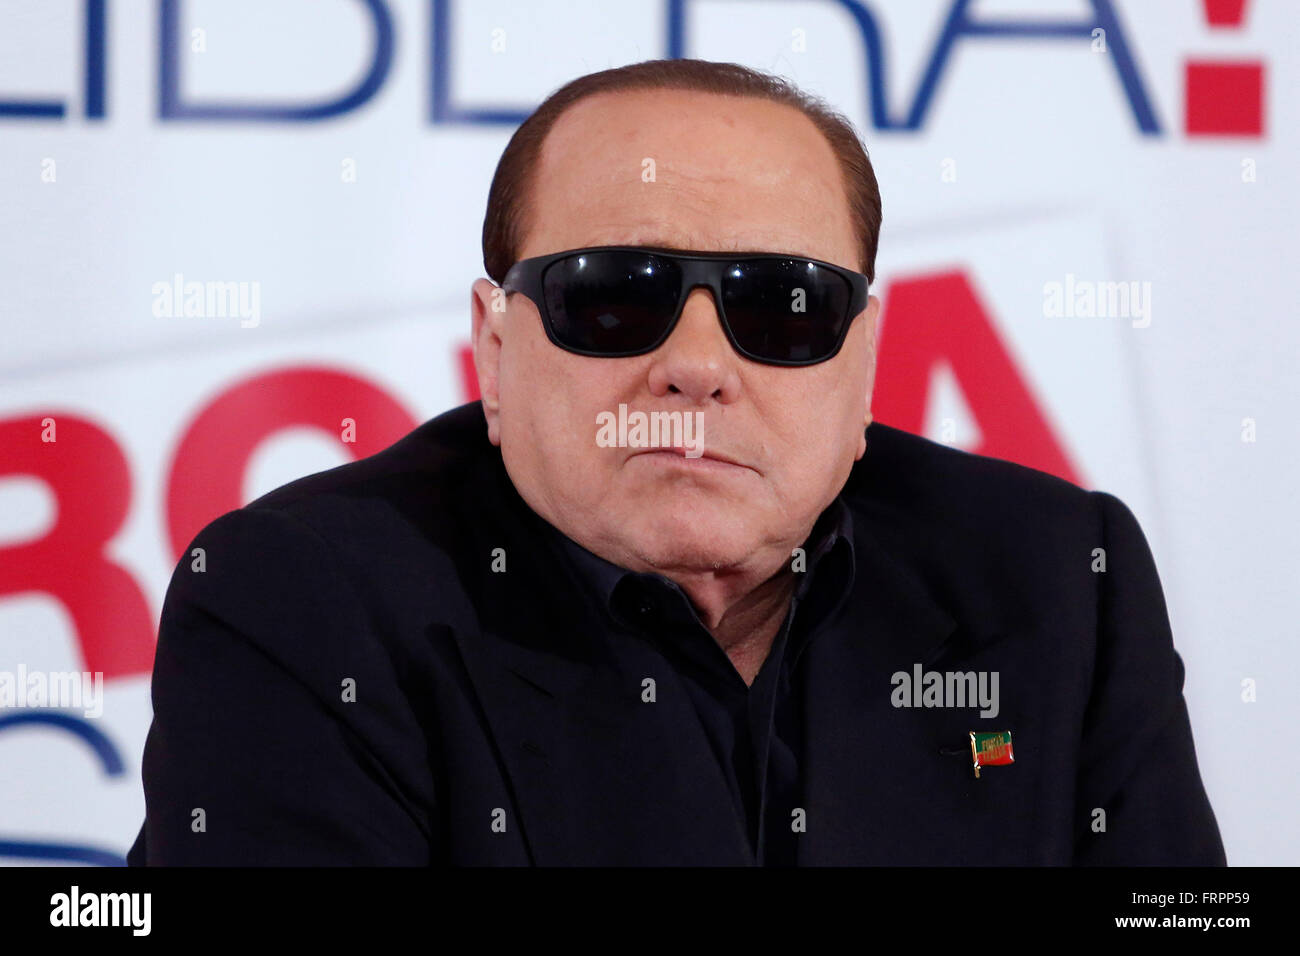 Rome, Italy. 23rd March, 2016. Silvio Berlusconi wearing sunglasses due to  an operation Rome 23rd March 2016. The ex italian Premier visits the  headquarter of Forza Italia for the next elections in